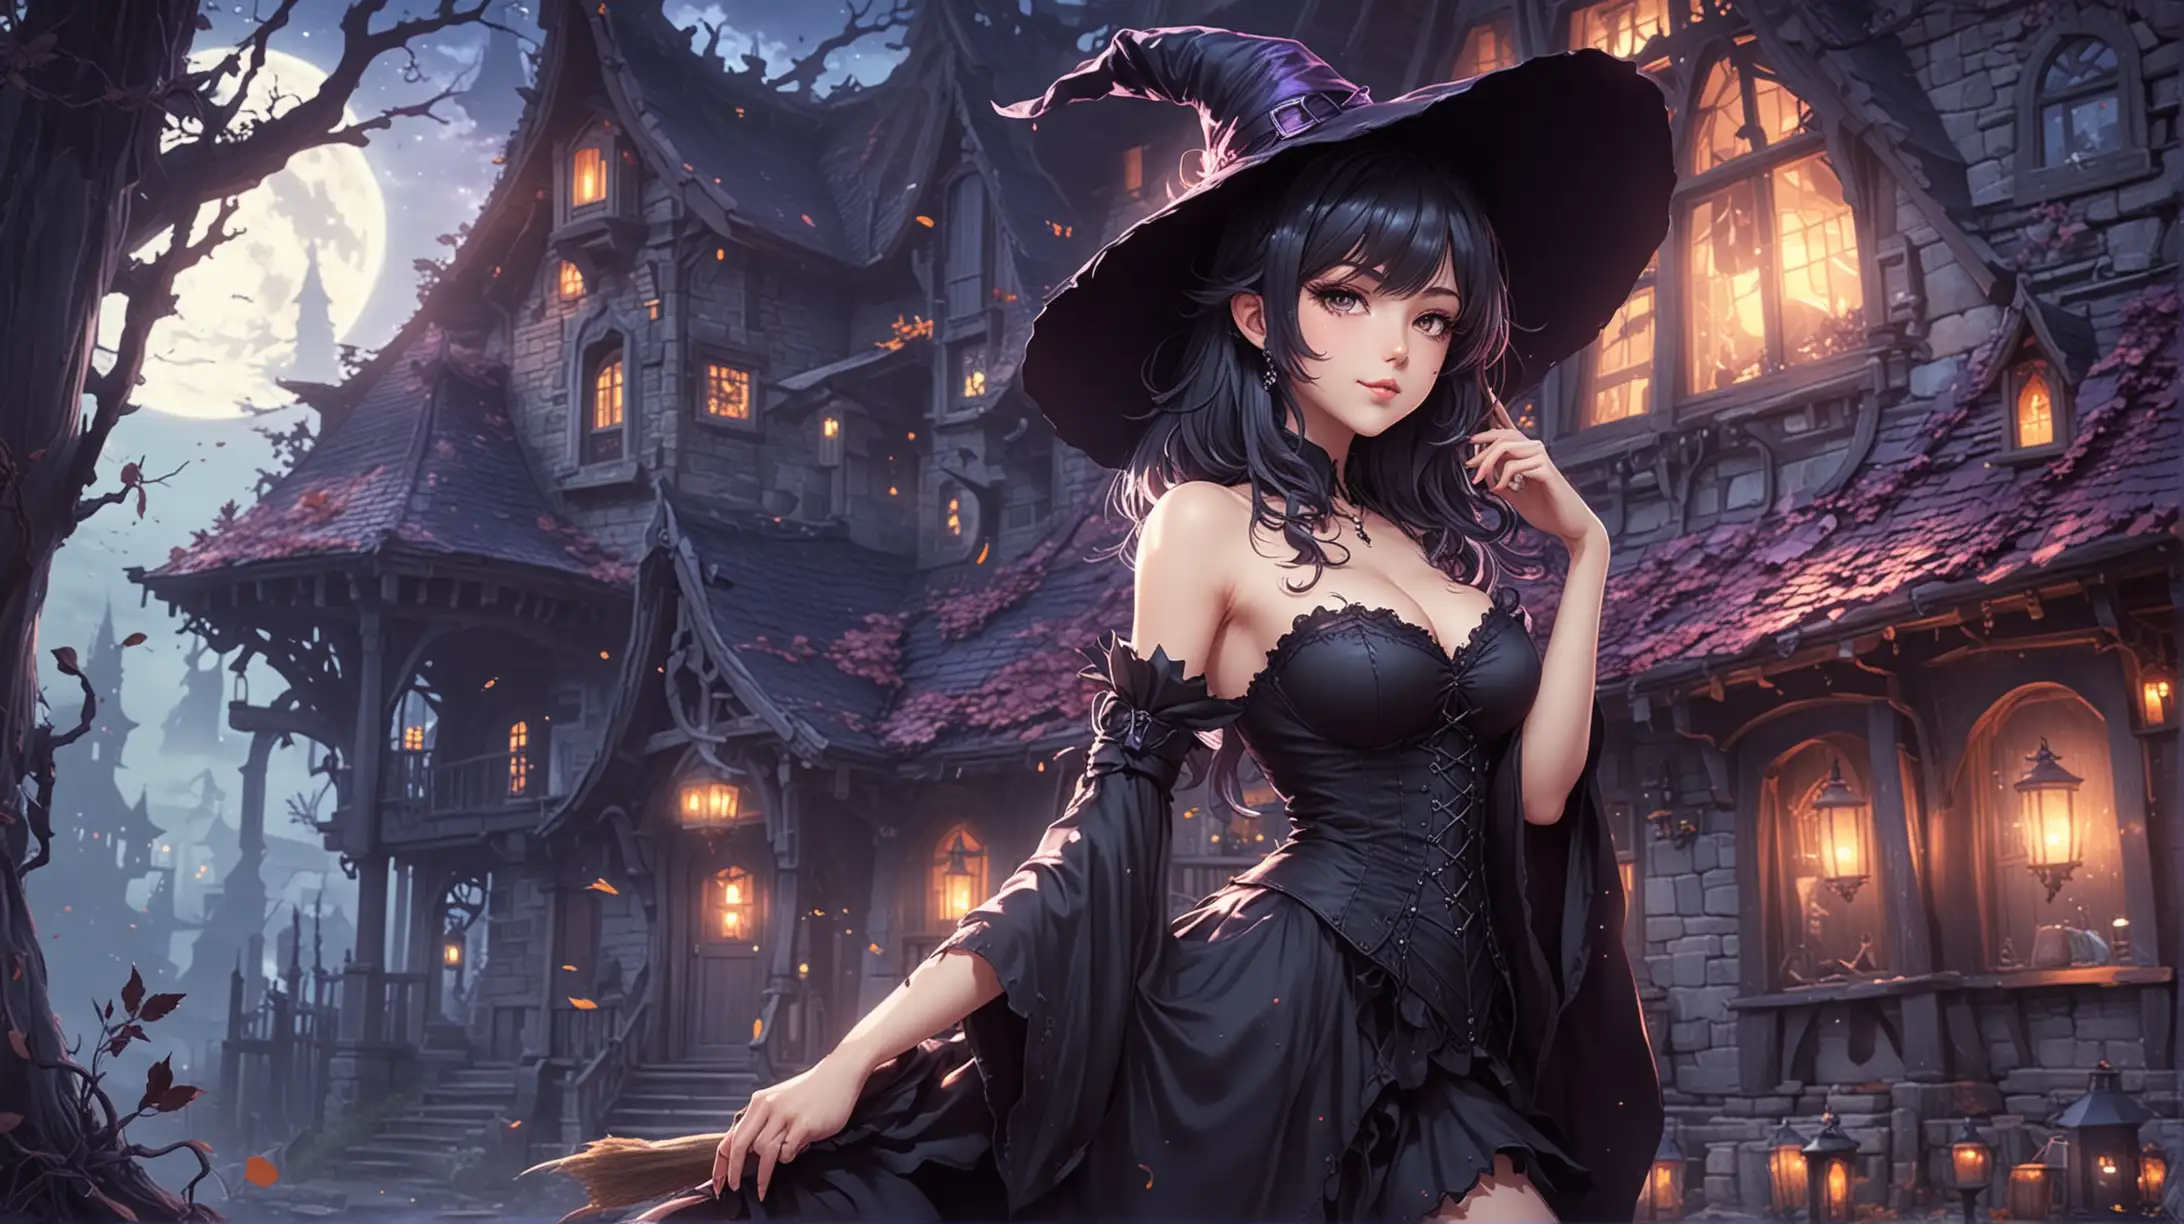 Anime Witch with Enchanting Charm in a Fairytale Cottage